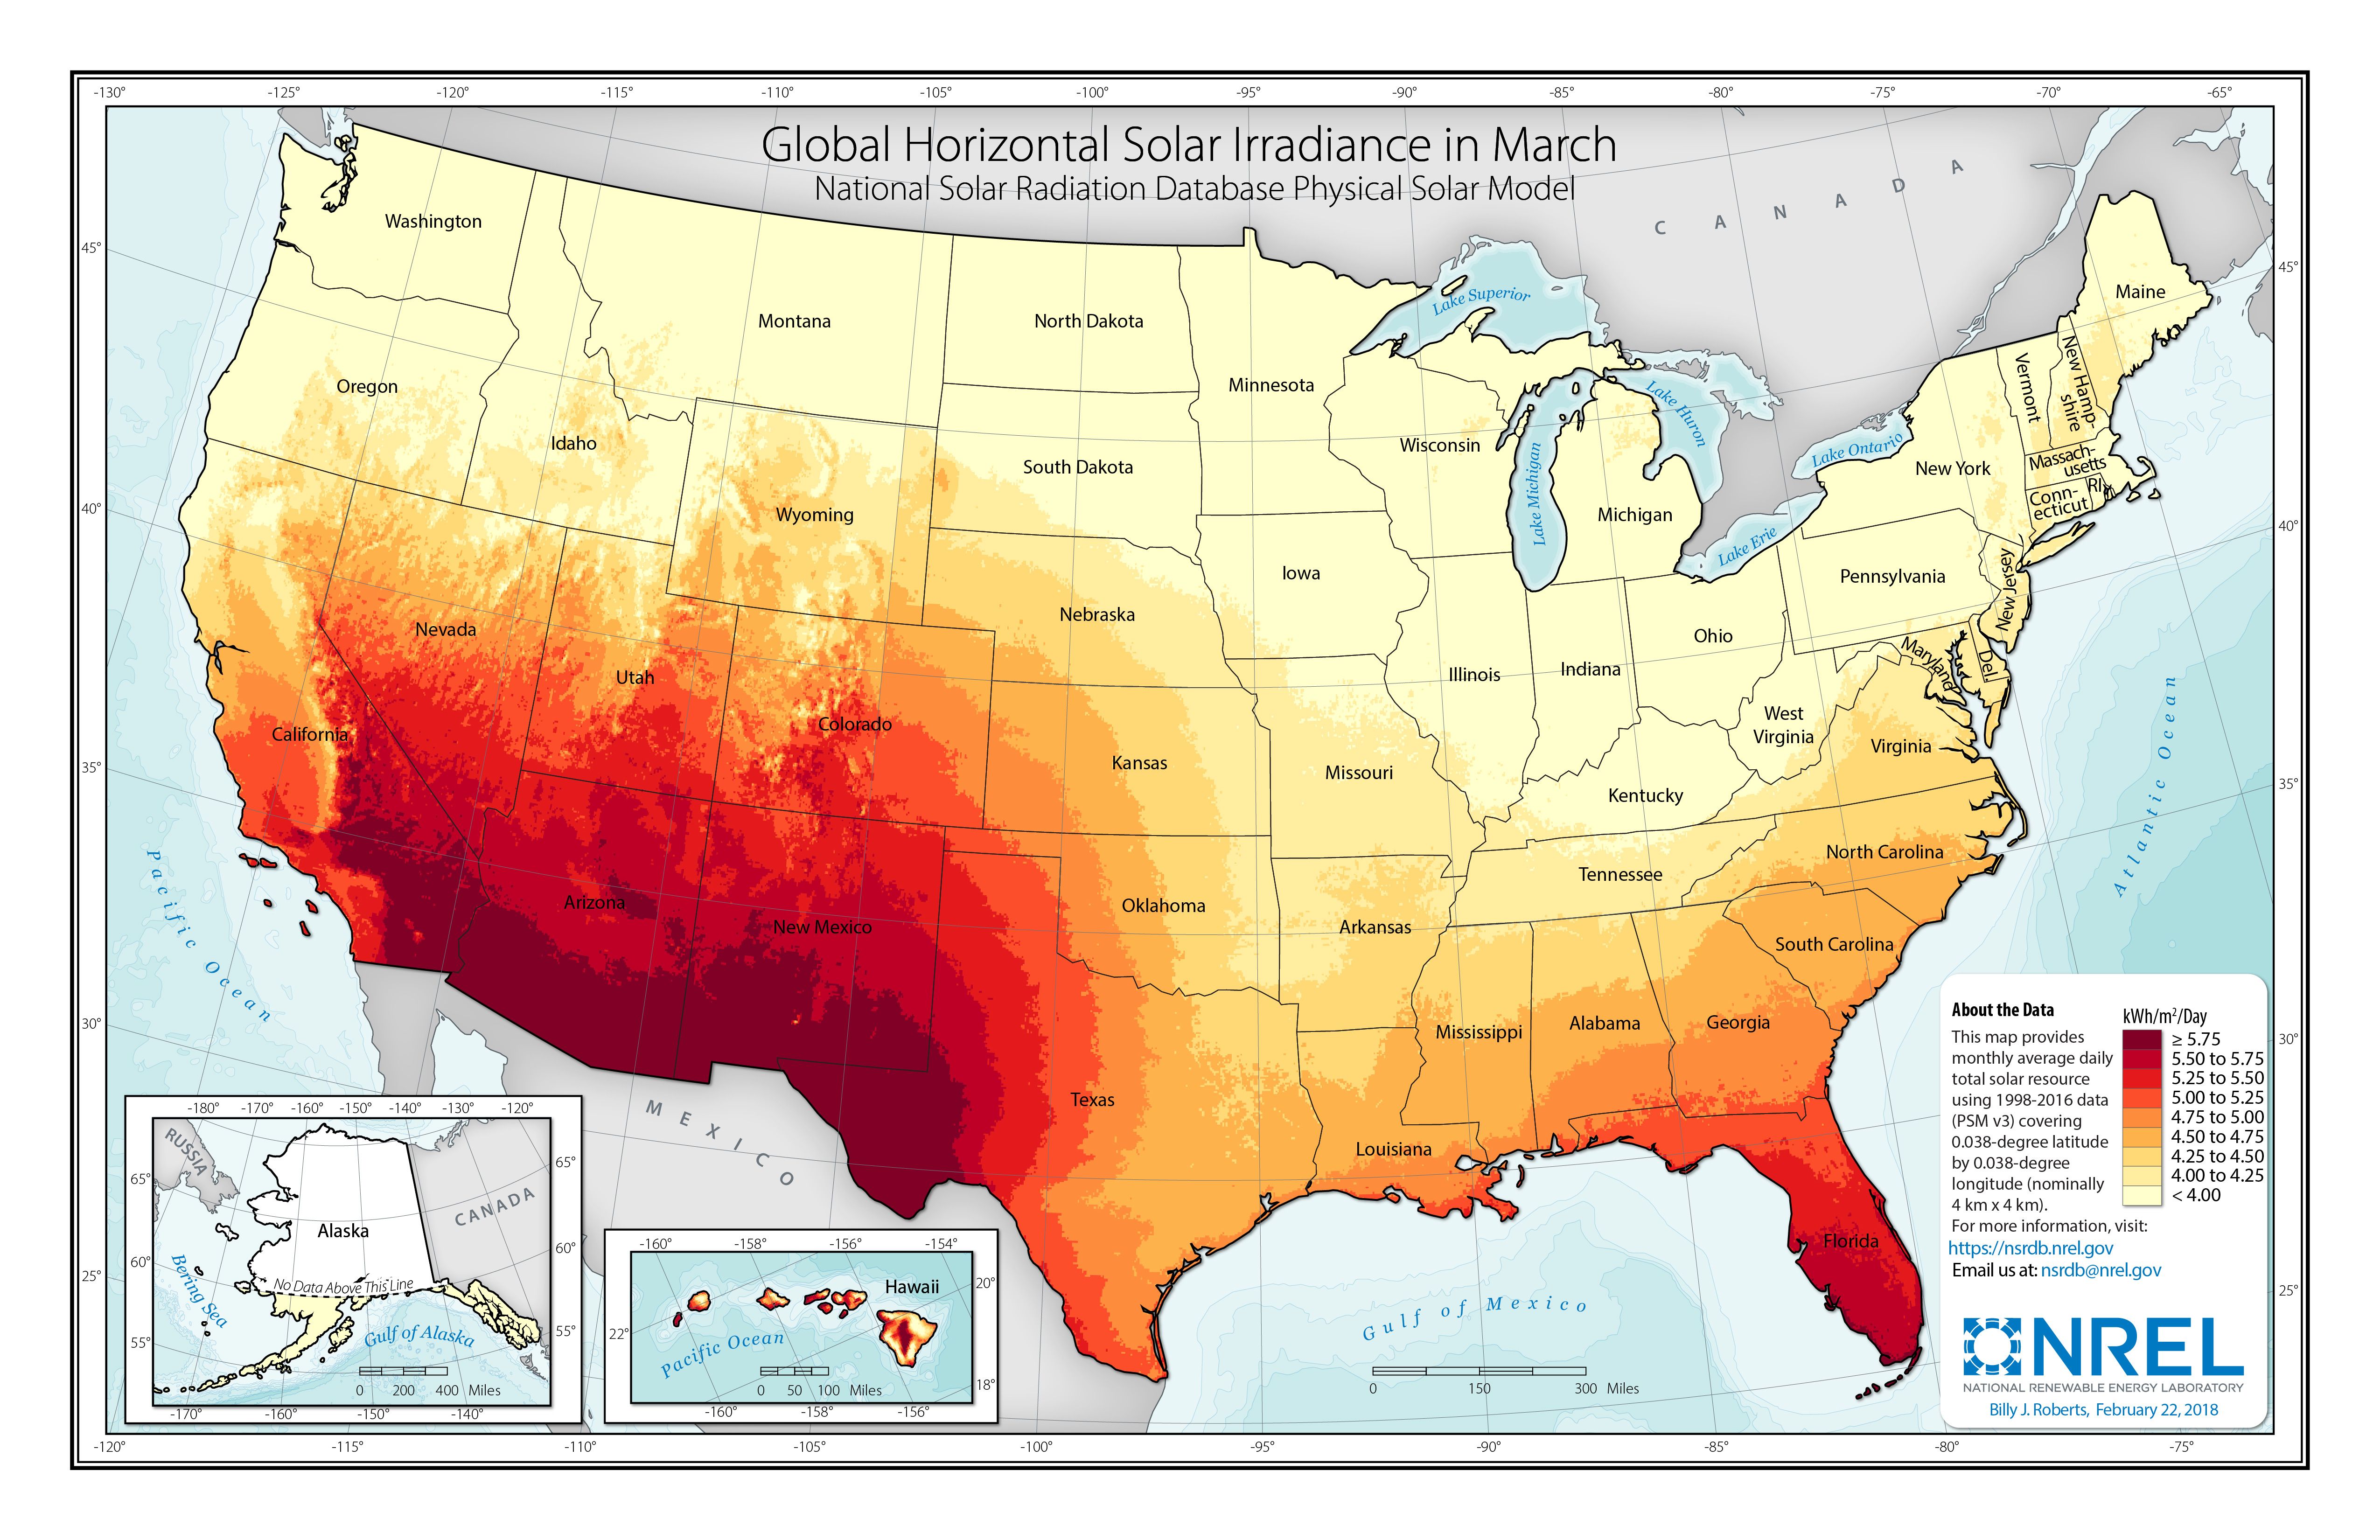 Solar Resource Data, Tools, and Maps. Geospatial Data Science